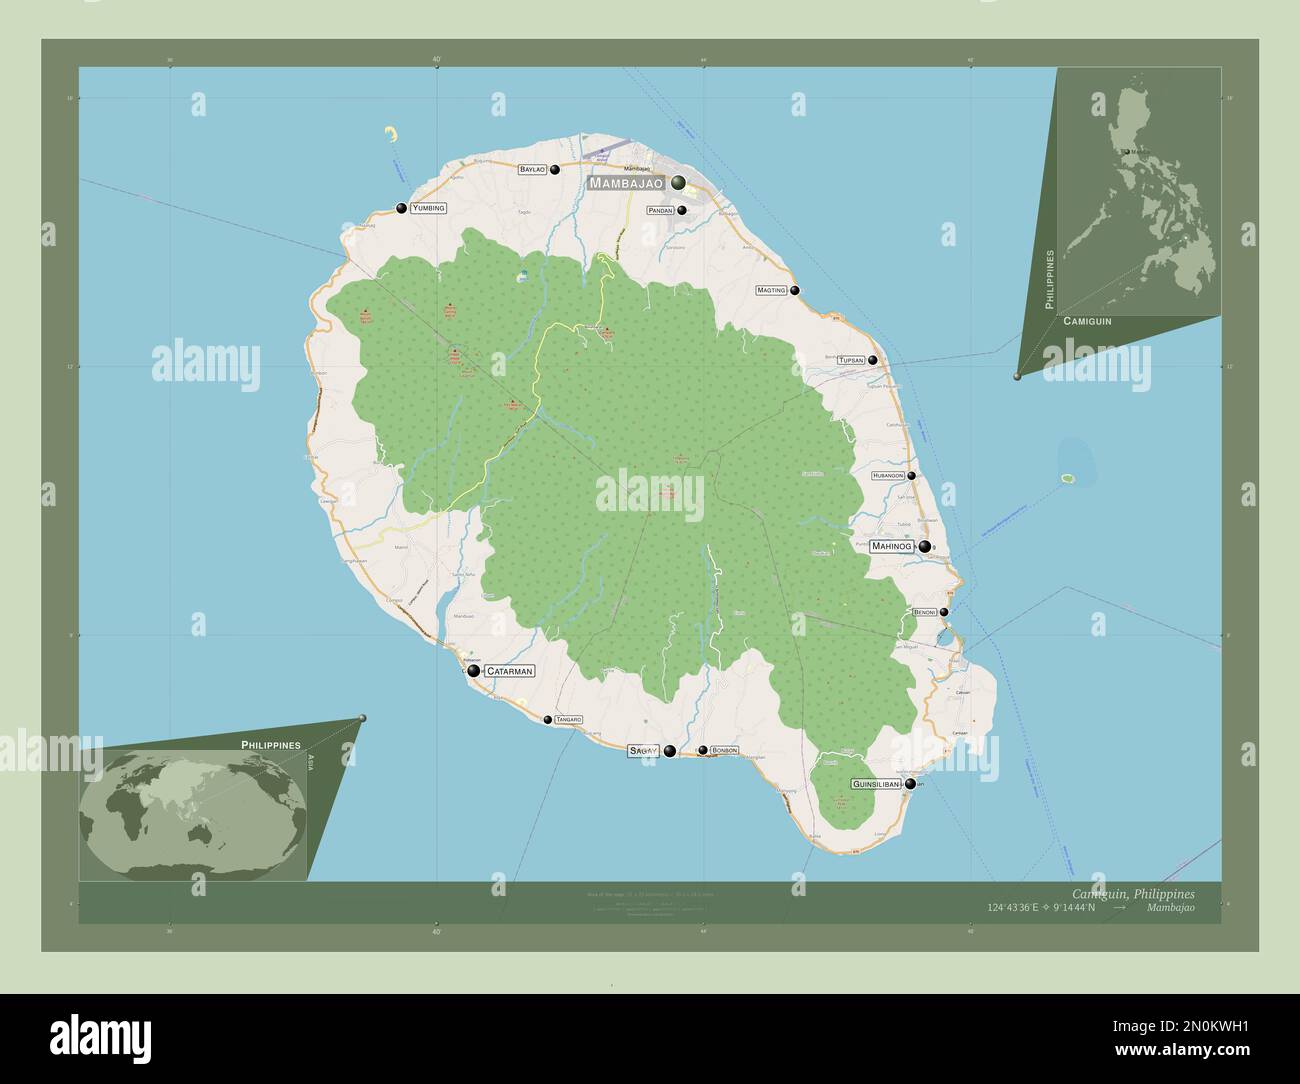 Camiguin, province of Philippines. Open Street Map. Locations and names of major cities of the region. Corner auxiliary location maps Stock Photo